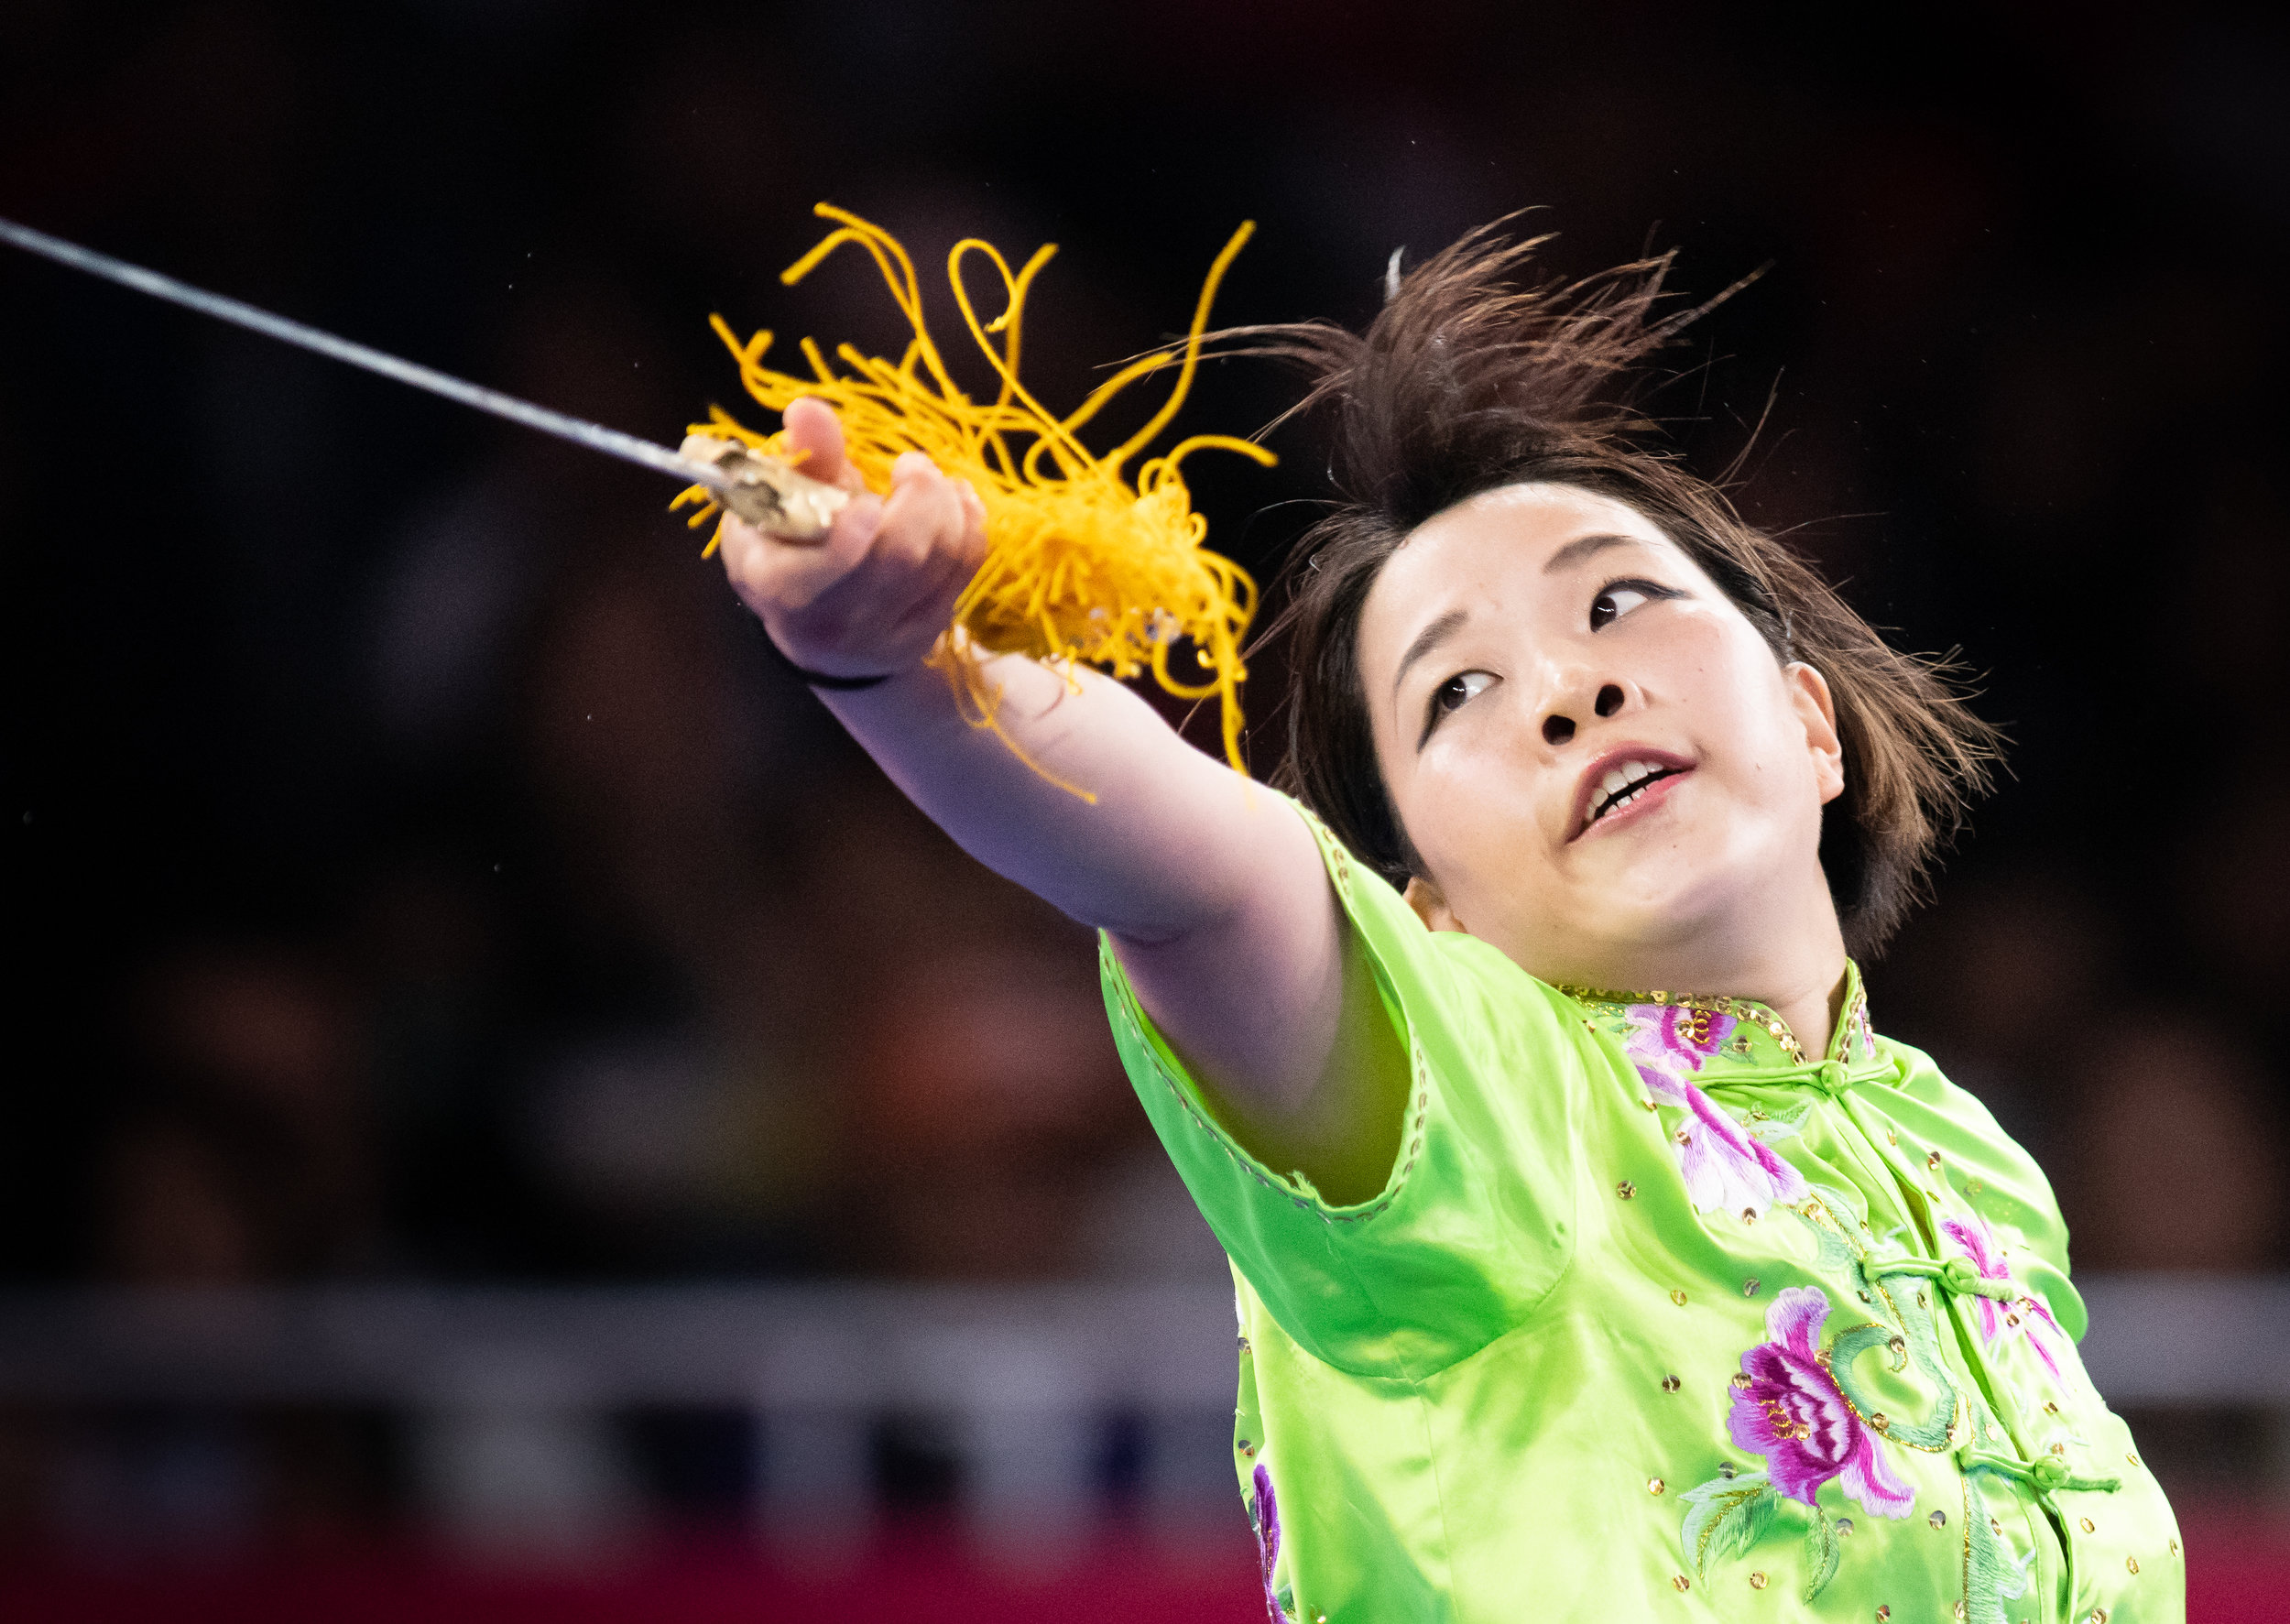 A Japanese wushu exponent during the Women's Jianshu event of the Asian Games at the Jakarta International Expo.